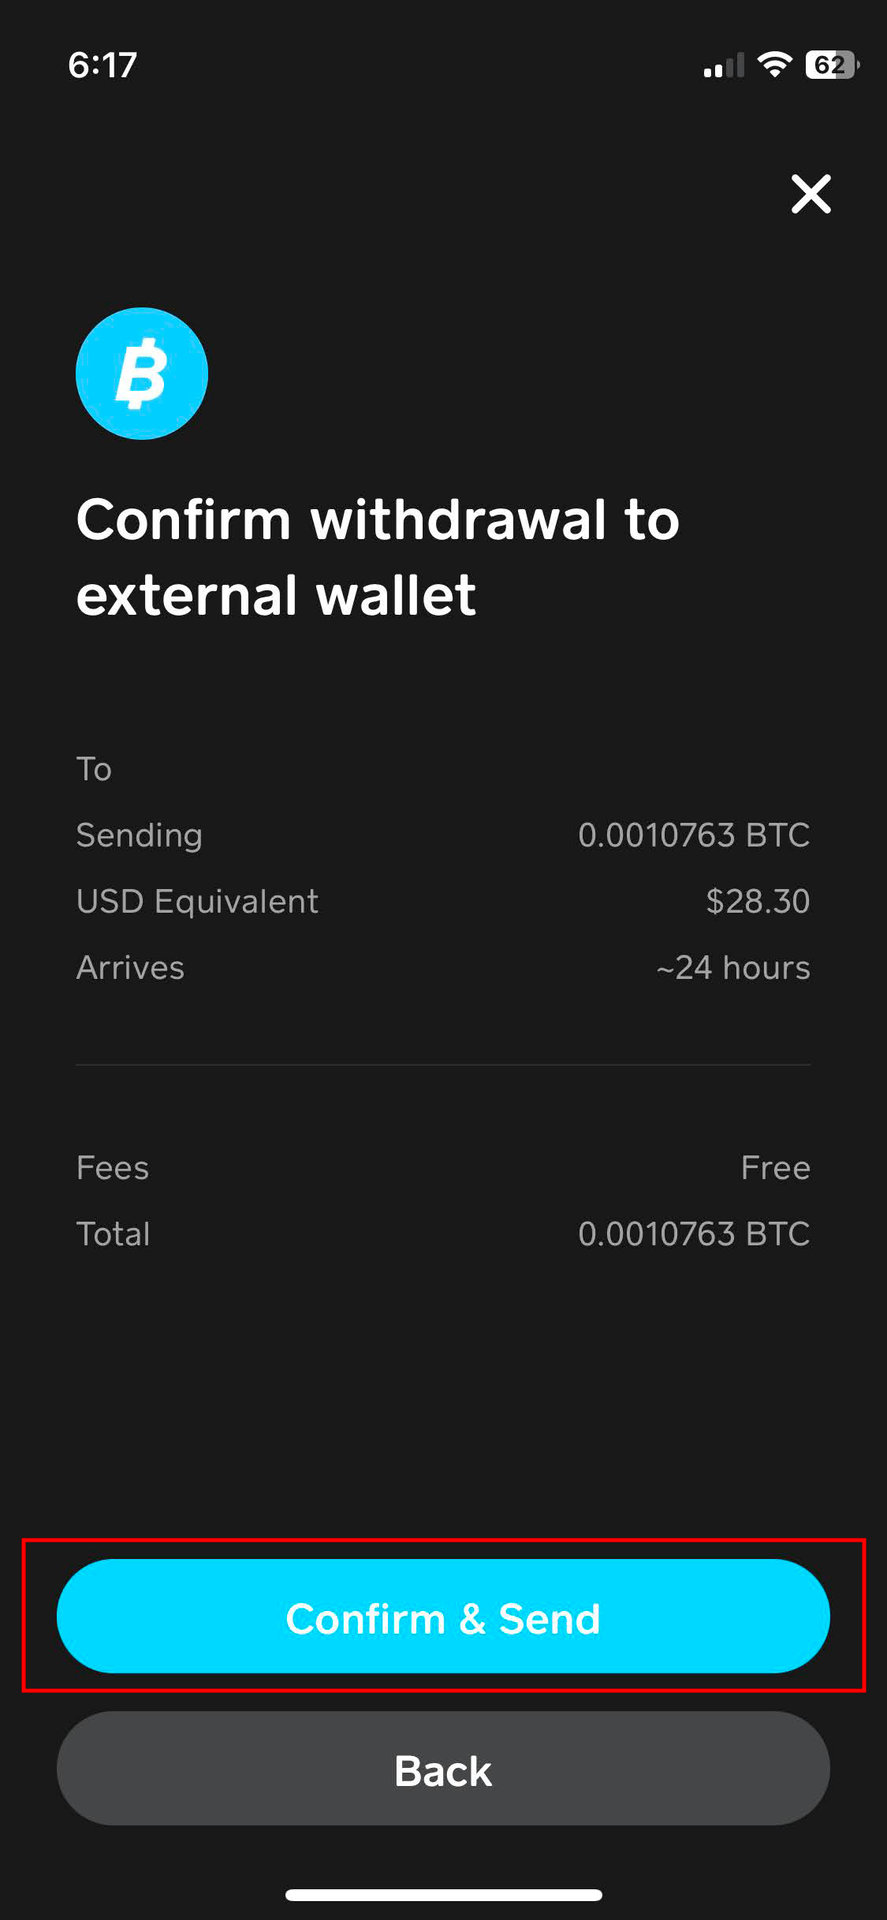 Step 6: Finally, you will be asked to enter the amount of Bitcoin you wish to send. You can either enter the amount in Bitcoin or the equivalent value in your local currency. Take note of any fees that may be incurred during the transaction. Once you have entered the amount, tap on the 